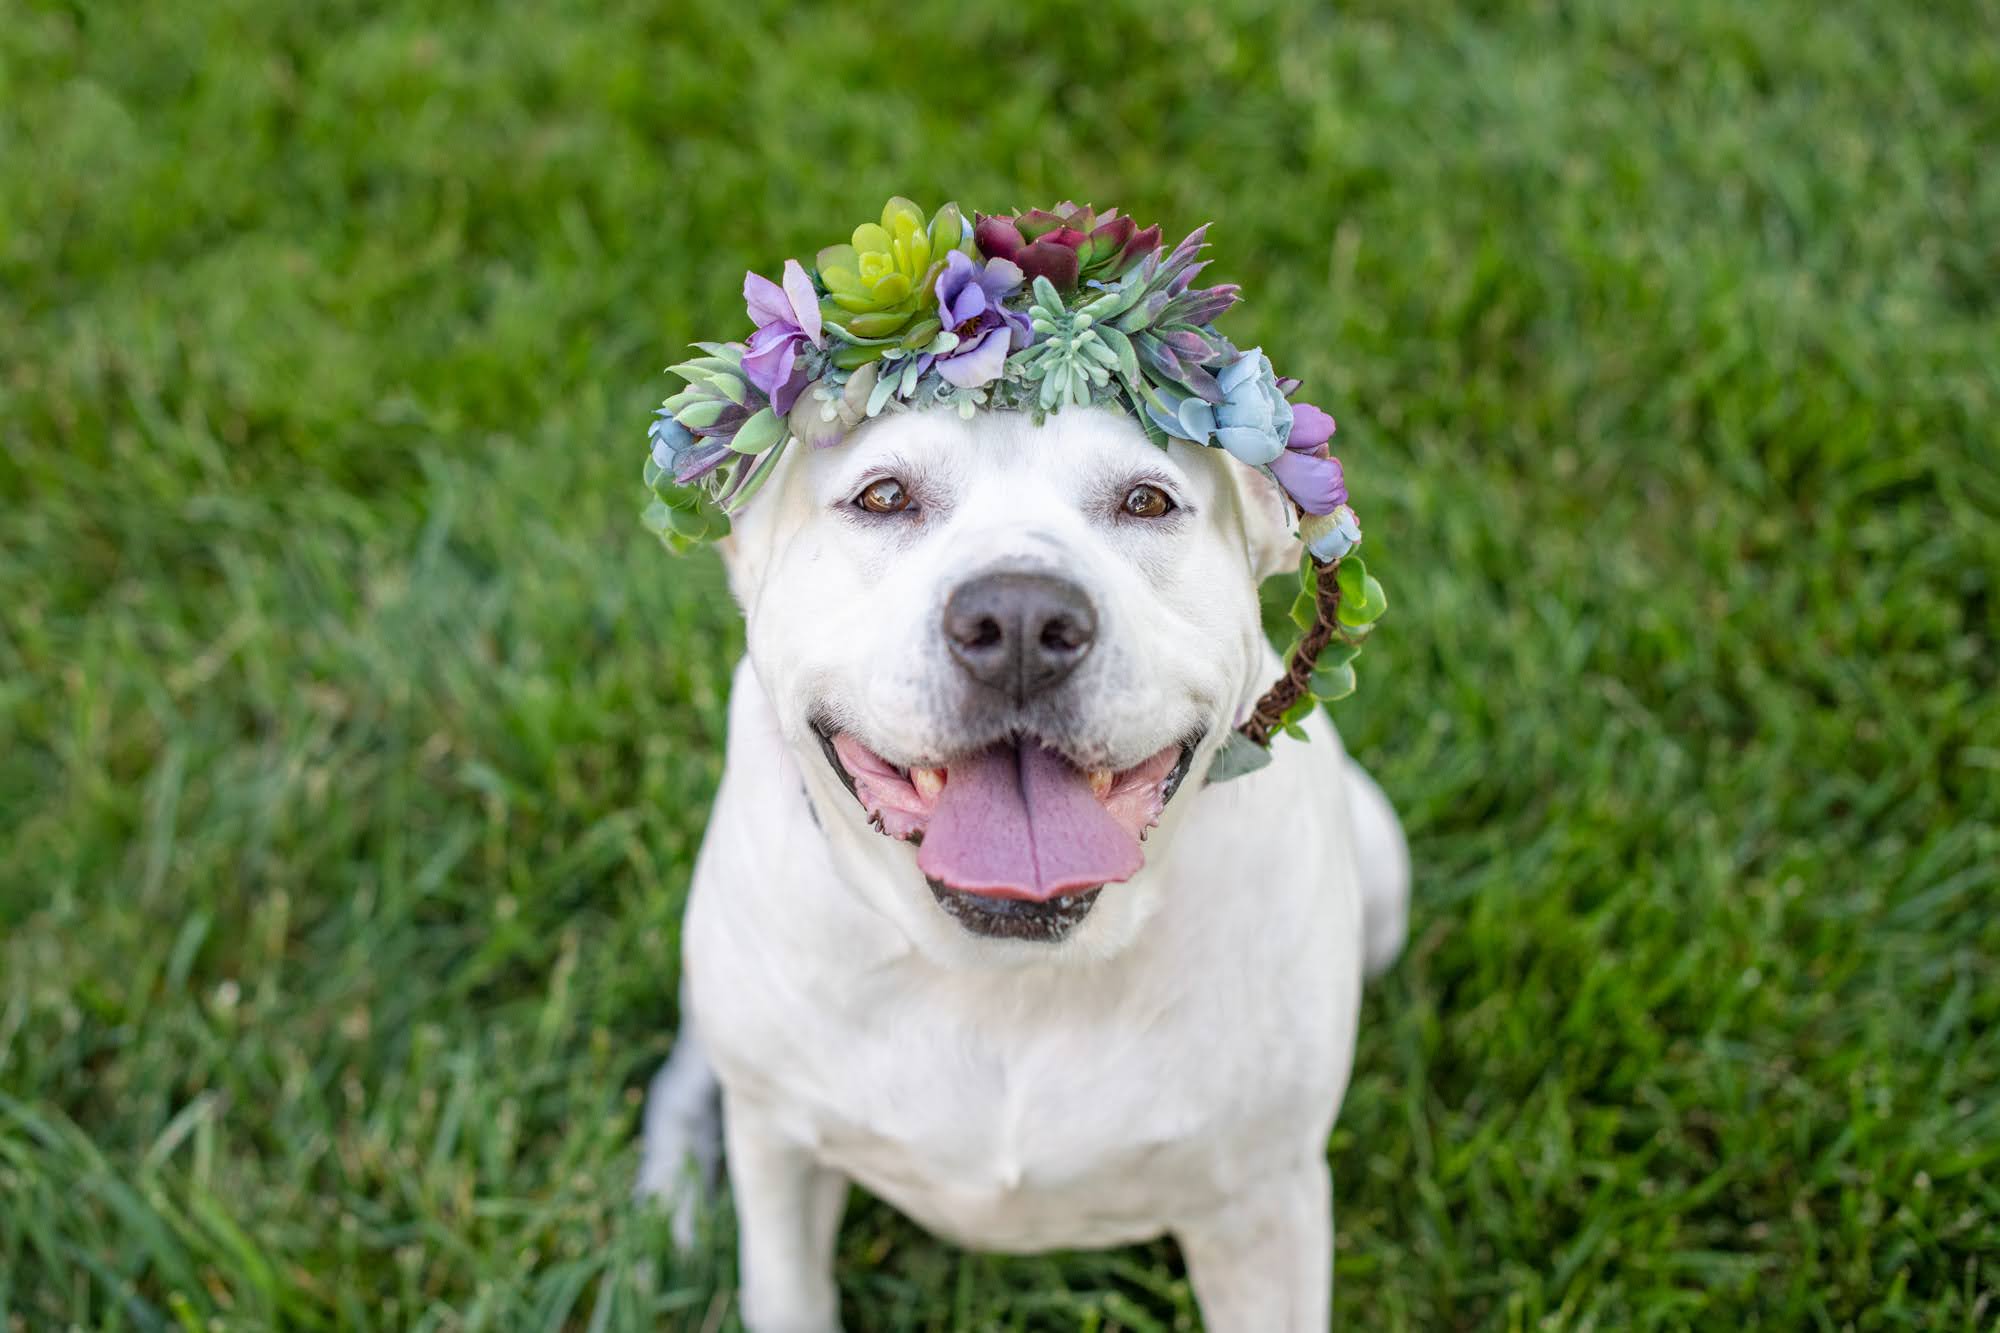 cute dog with flower crown on head